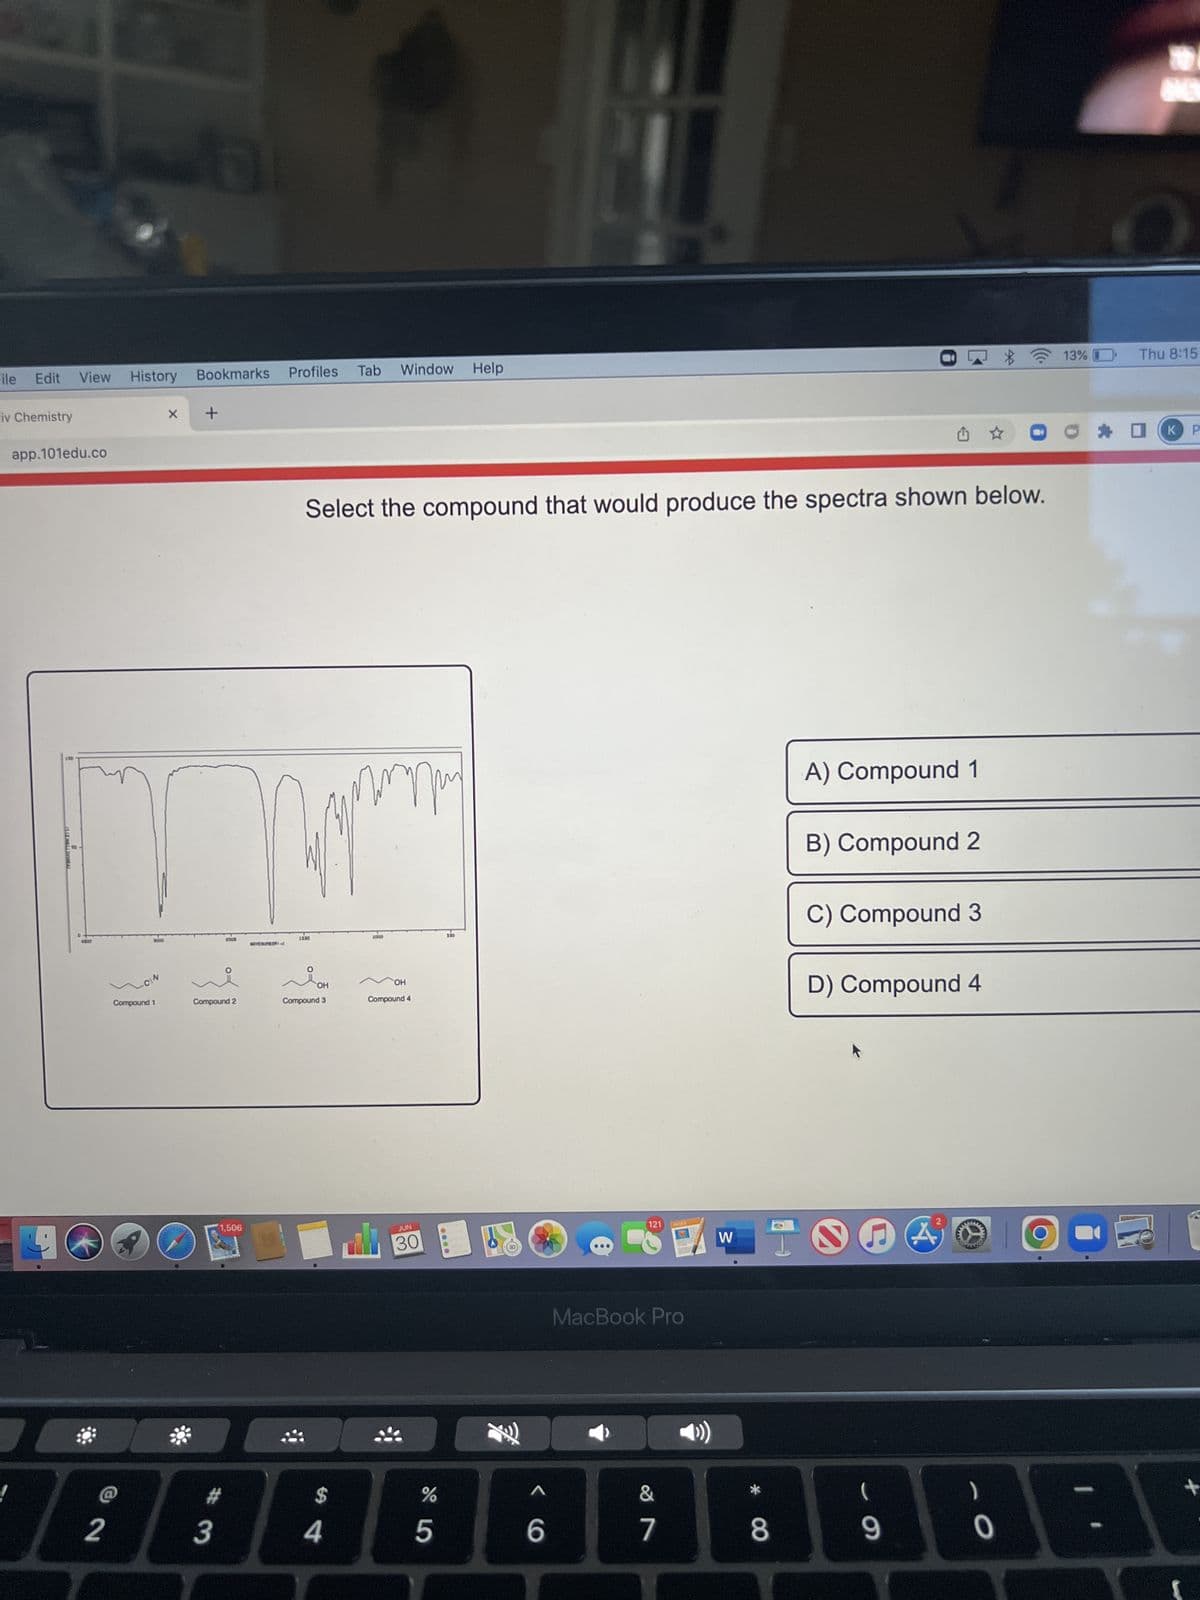 File Edit View
iv Chemistry
app.101edu.co
70
4000
2
History Bookmarks
CEN
Compound 1
X +
11
#
3
12000
Compound 2
O
1,506
Profiles
1500
O
Select the compound that would produce the spectra shown below.
Compo
OH
3
$
Tab Window Help
4
три
1000
OH
Compound 4
JUN
30
do 5
%
500
be
^
6
121
MacBook Pro
&
18
PAGES
7
W
*
8
0
✩✩
A) Compound 1
B) Compound 2
C) Compound 3
(
9
D) Compound 4
ww
)
0
13%
ONE
Thu 8:15
KP